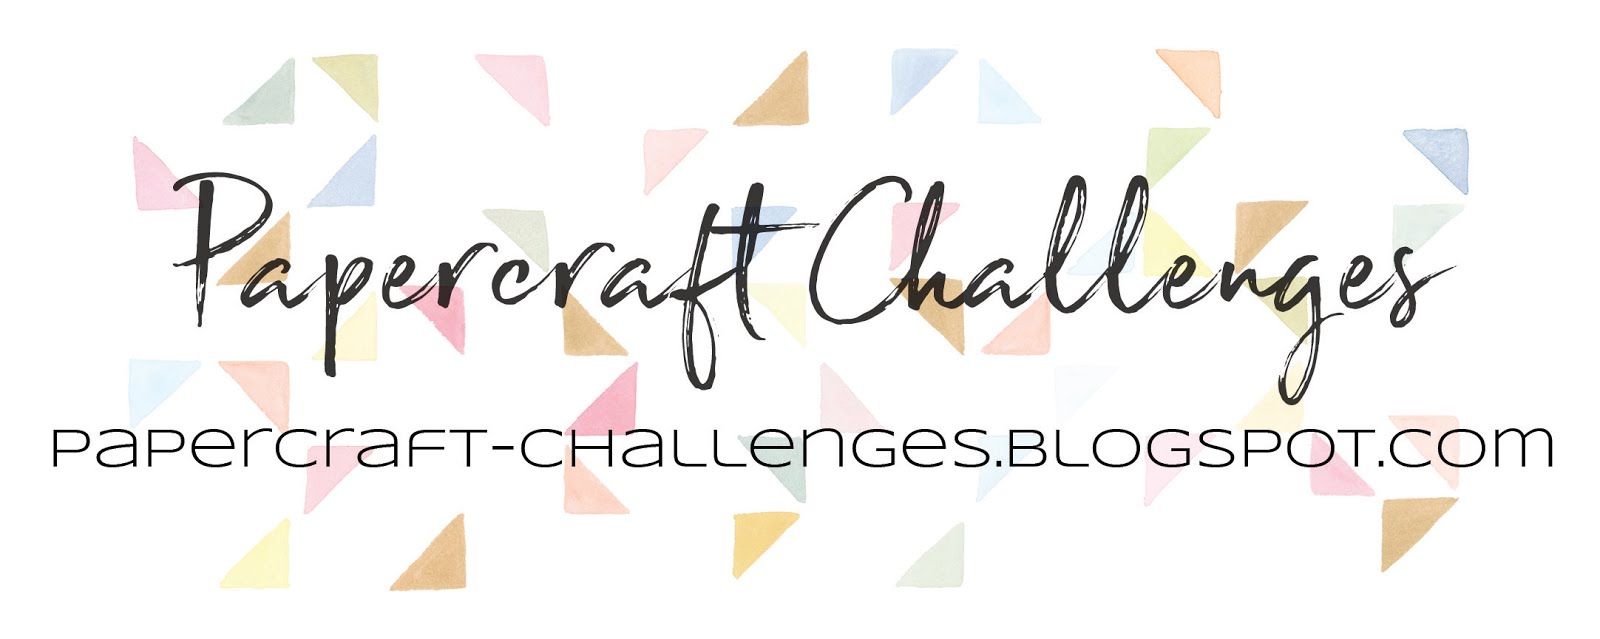 PaperCraft Challenges